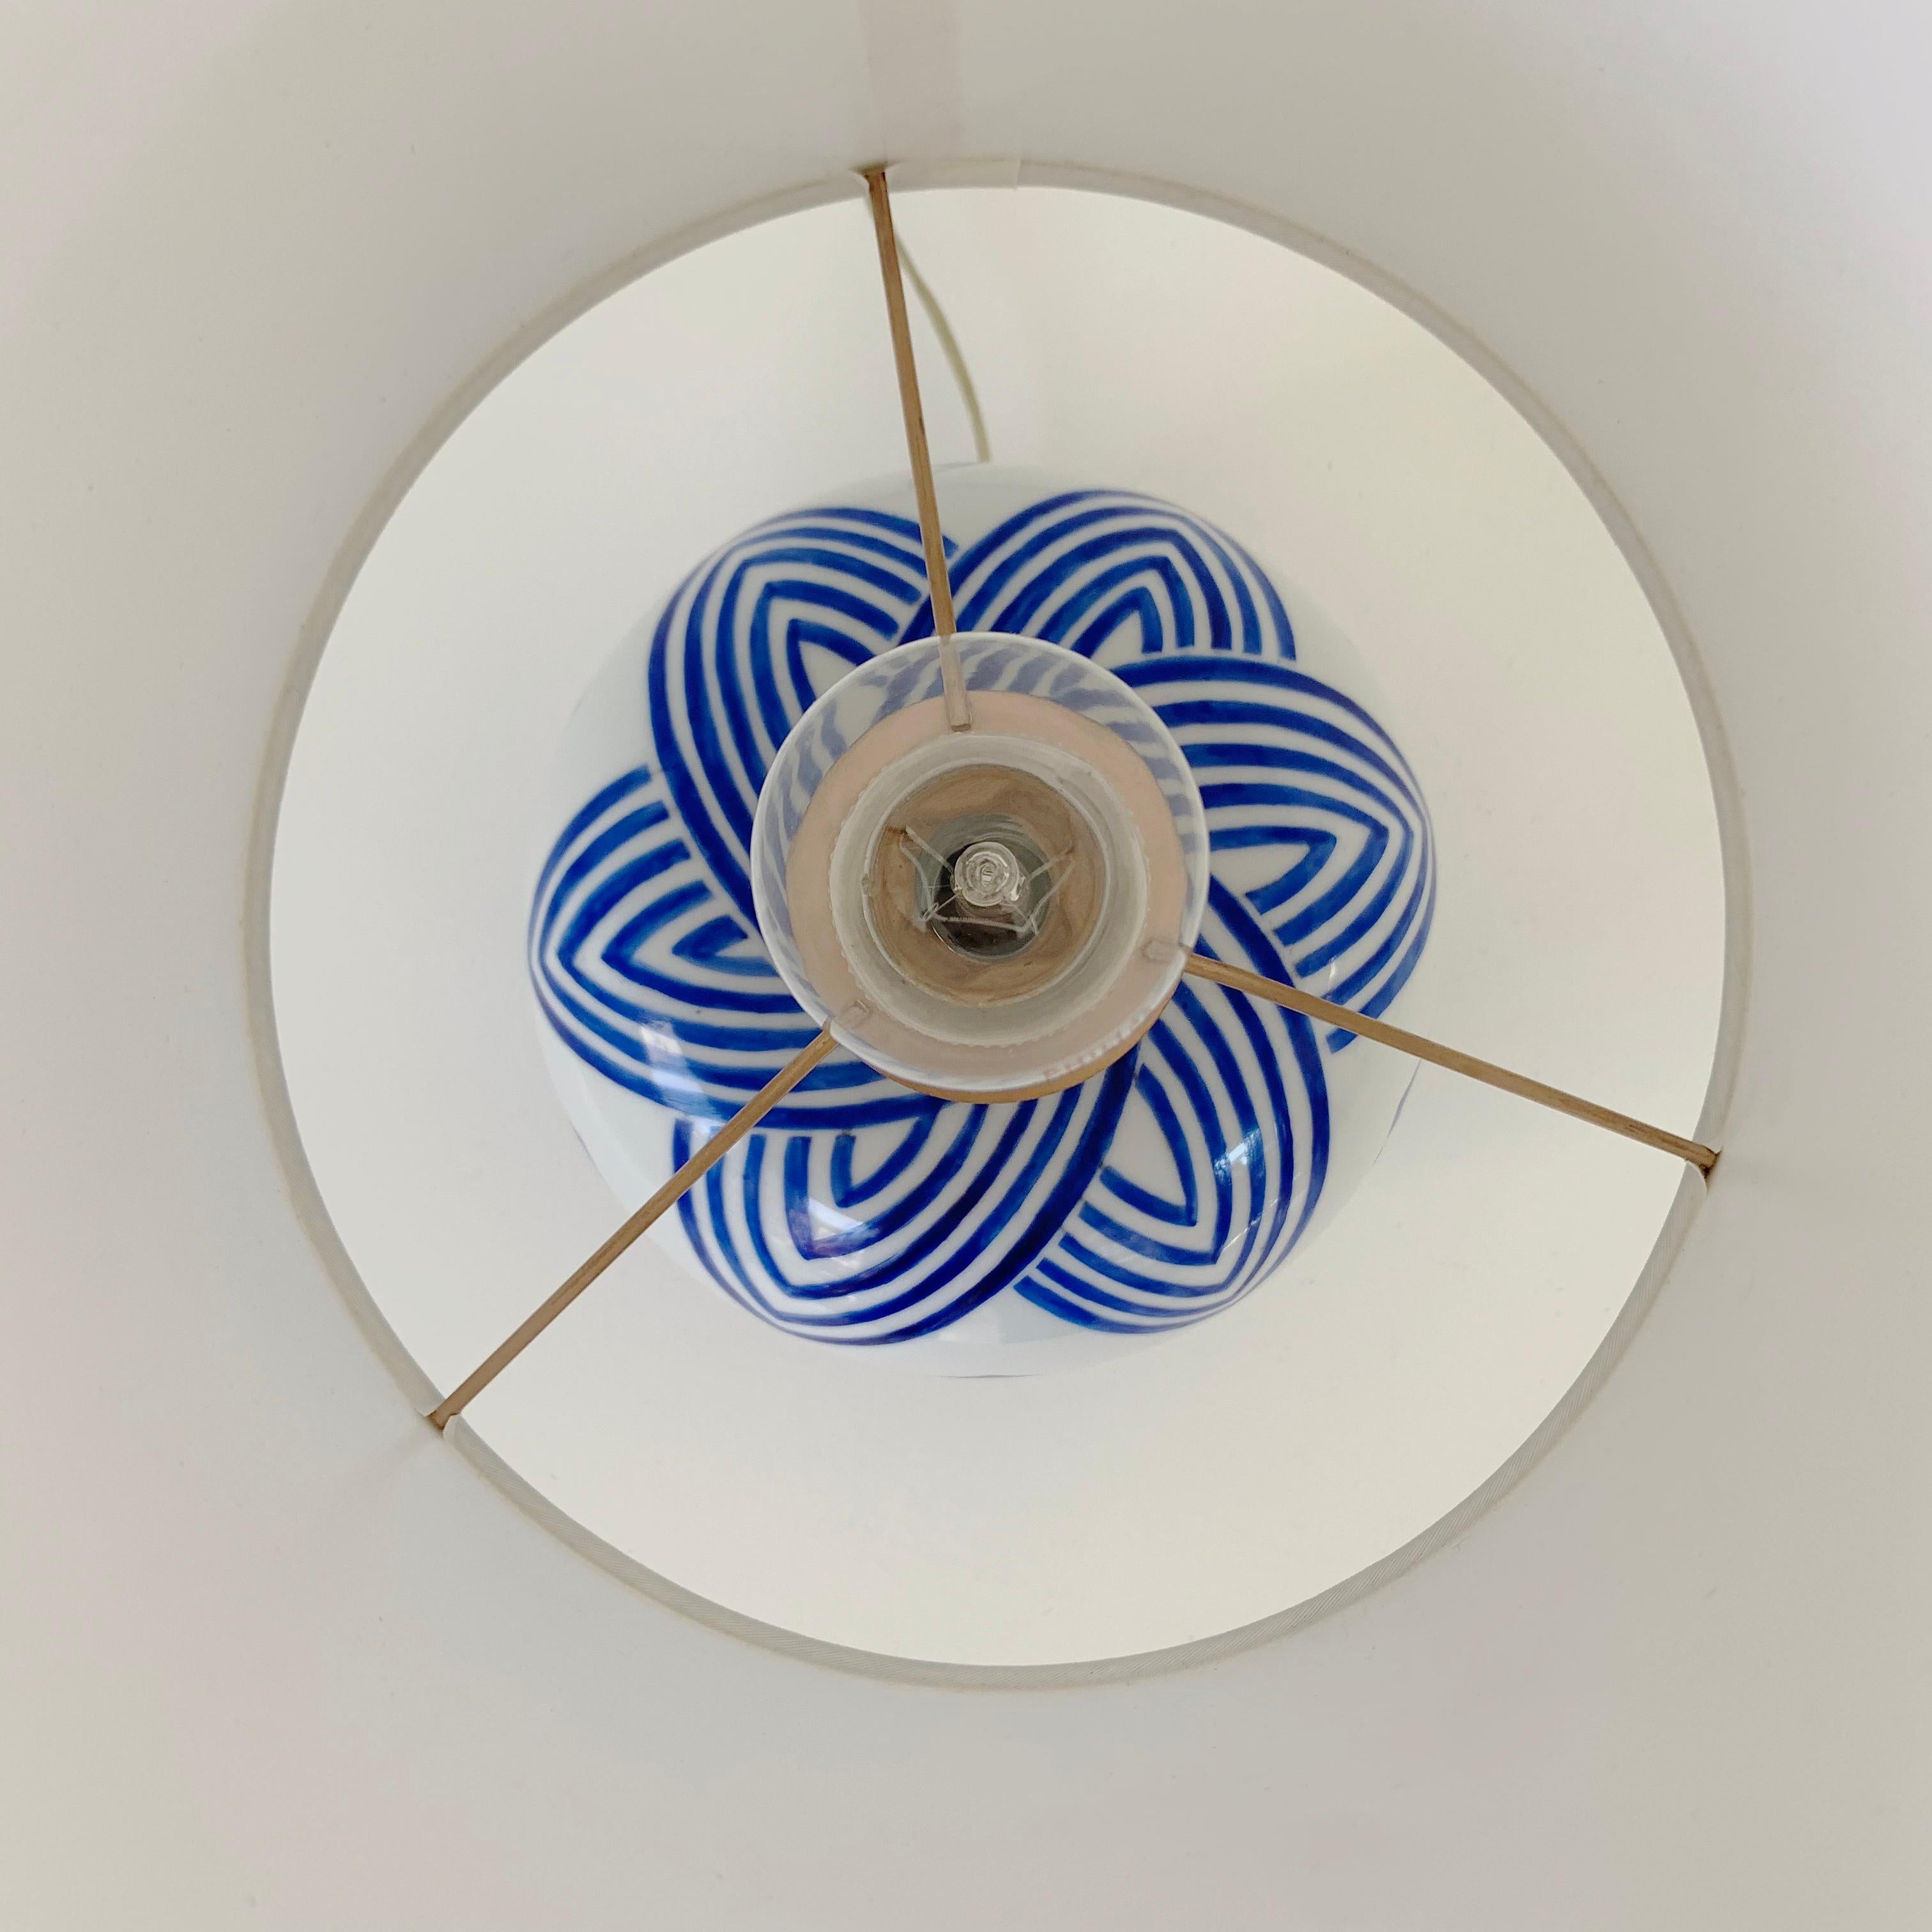 French Mid-Century White and Blue Decorative Table Lamp, 1929, France.